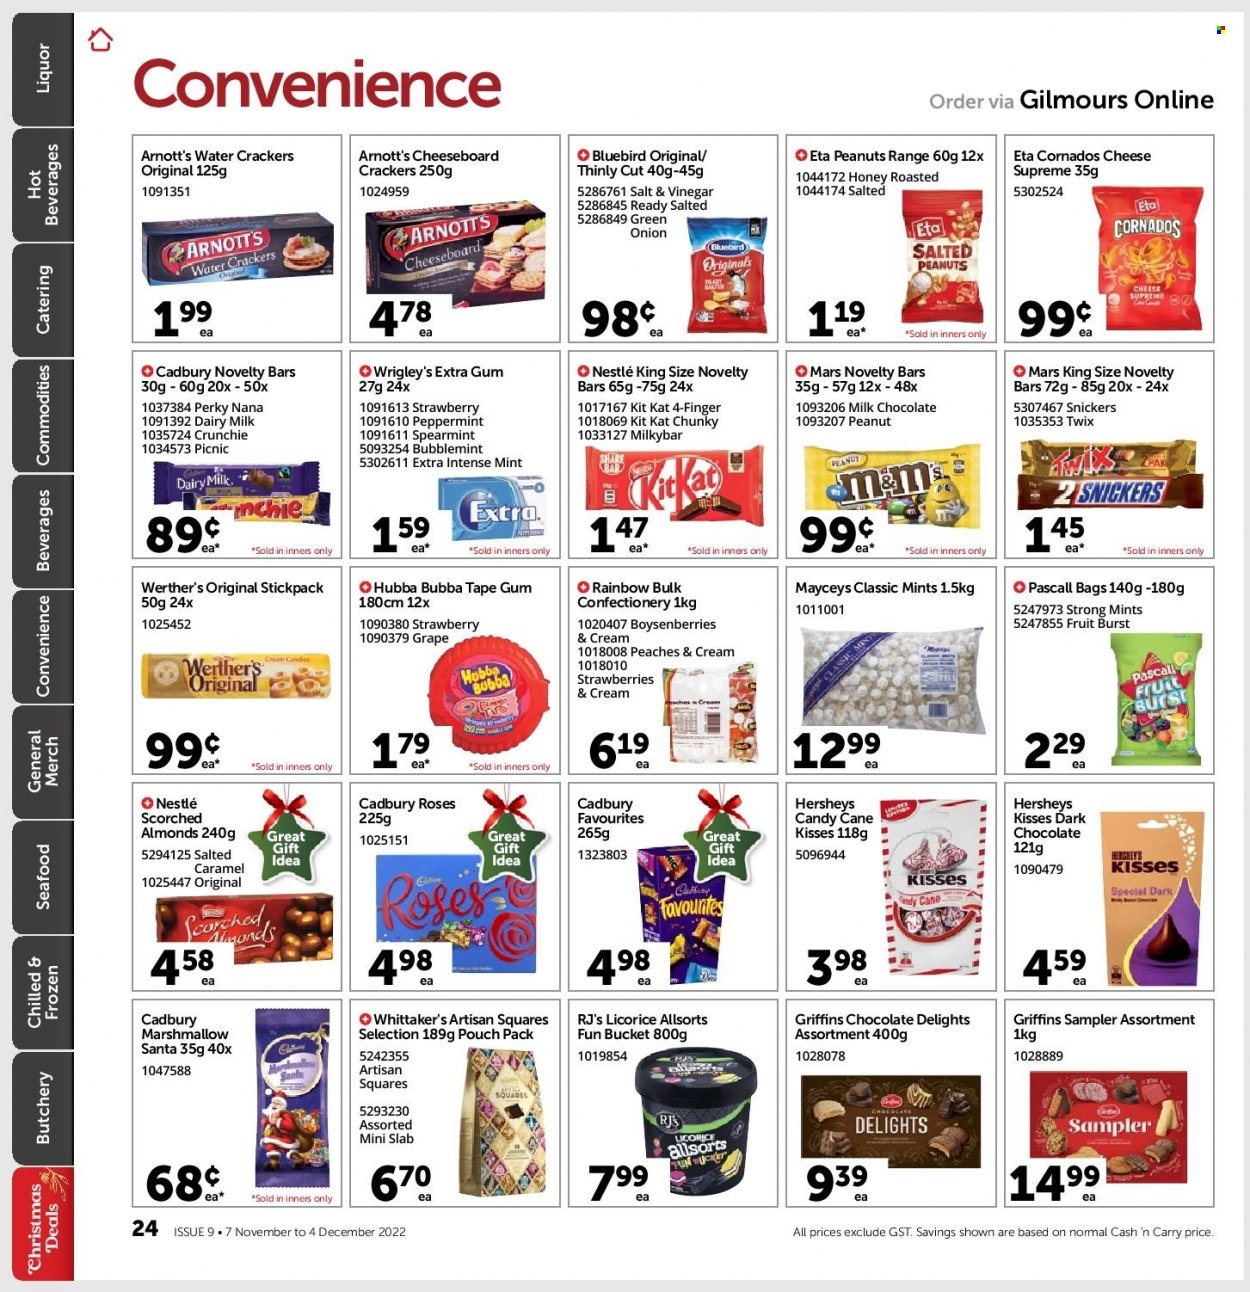 thumbnail - Gilmours mailer - 07.11.2022 - 04.12.2022 - Sales products - onion, green onion, peaches, seafood, cheese, Hershey's, marshmallows, milk chocolate, Nestlé, chocolate, candy cane, Snickers, Twix, Mars, KitKat, crackers, Santa, dark chocolate, Cadbury, Milkybar, Cadbury Roses, Scorched Almonds, Whittaker's, Artisan Squares Selection, Dairy Milk, Bluebird, caramel, vinegar, honey, peanuts, liquor. Page 23.